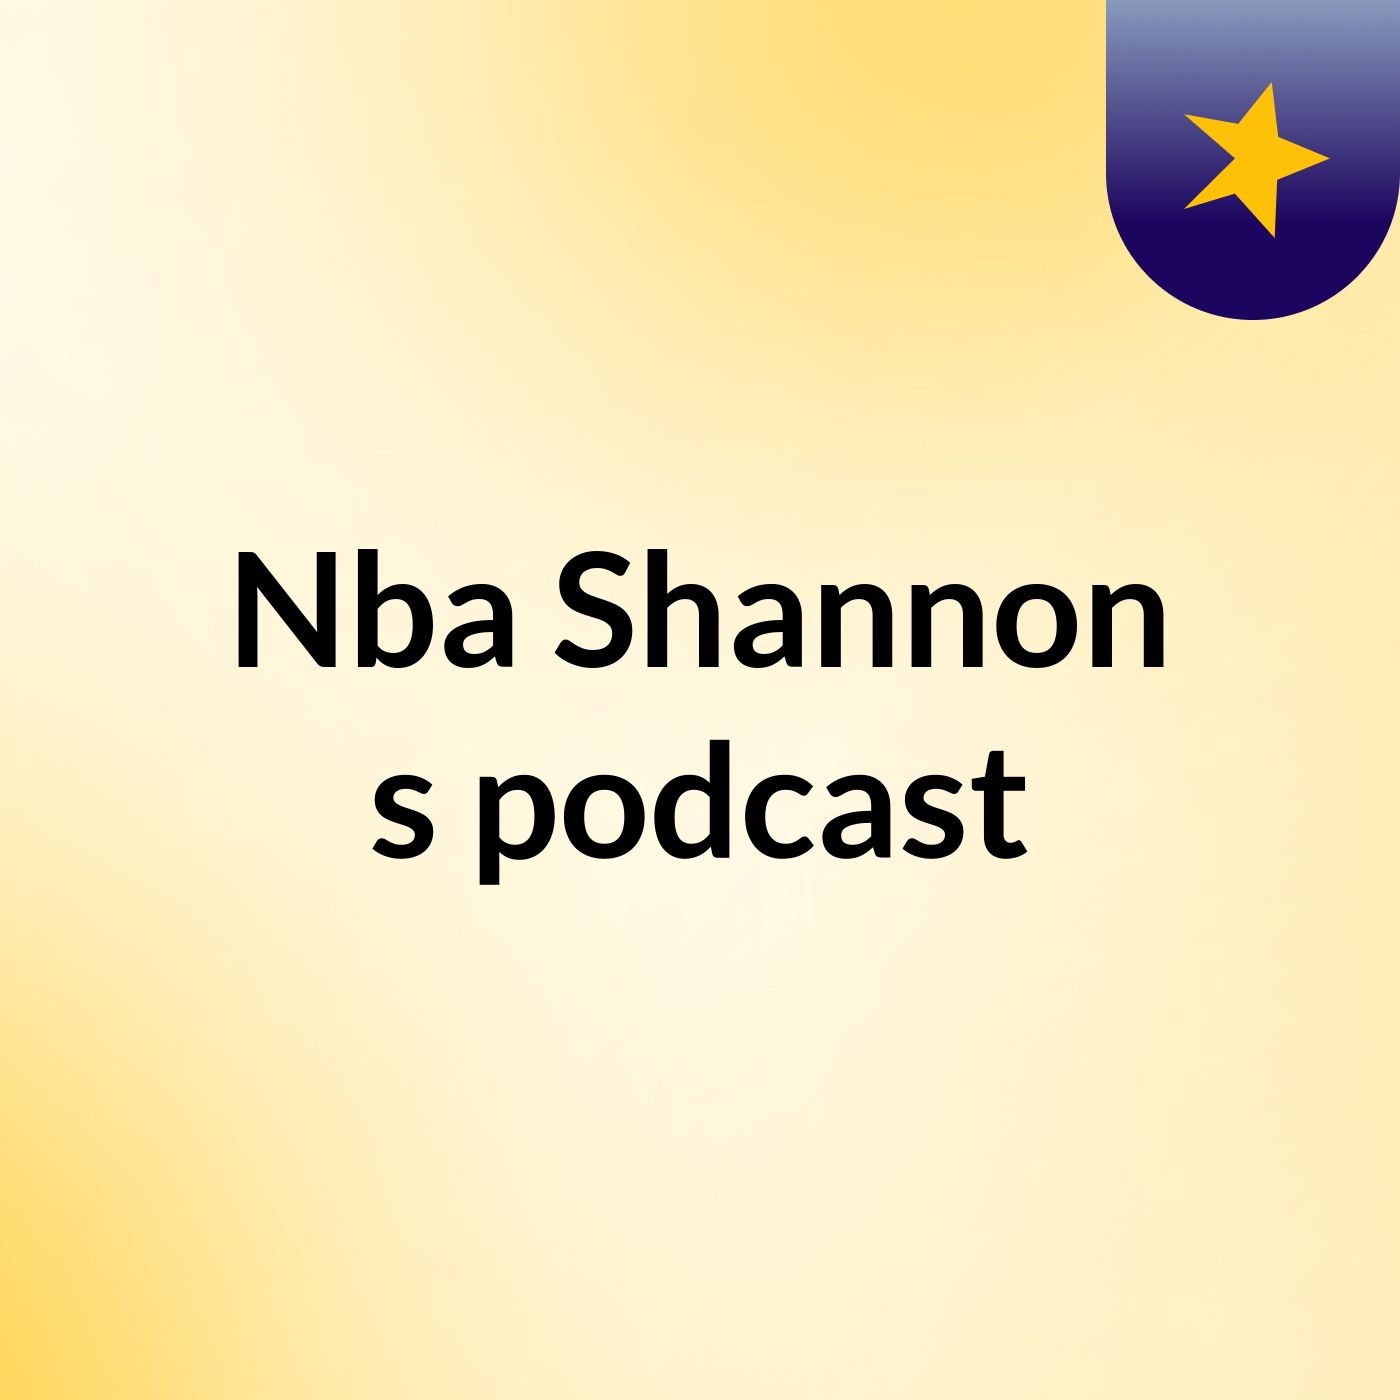 Nba Shannon's podcast